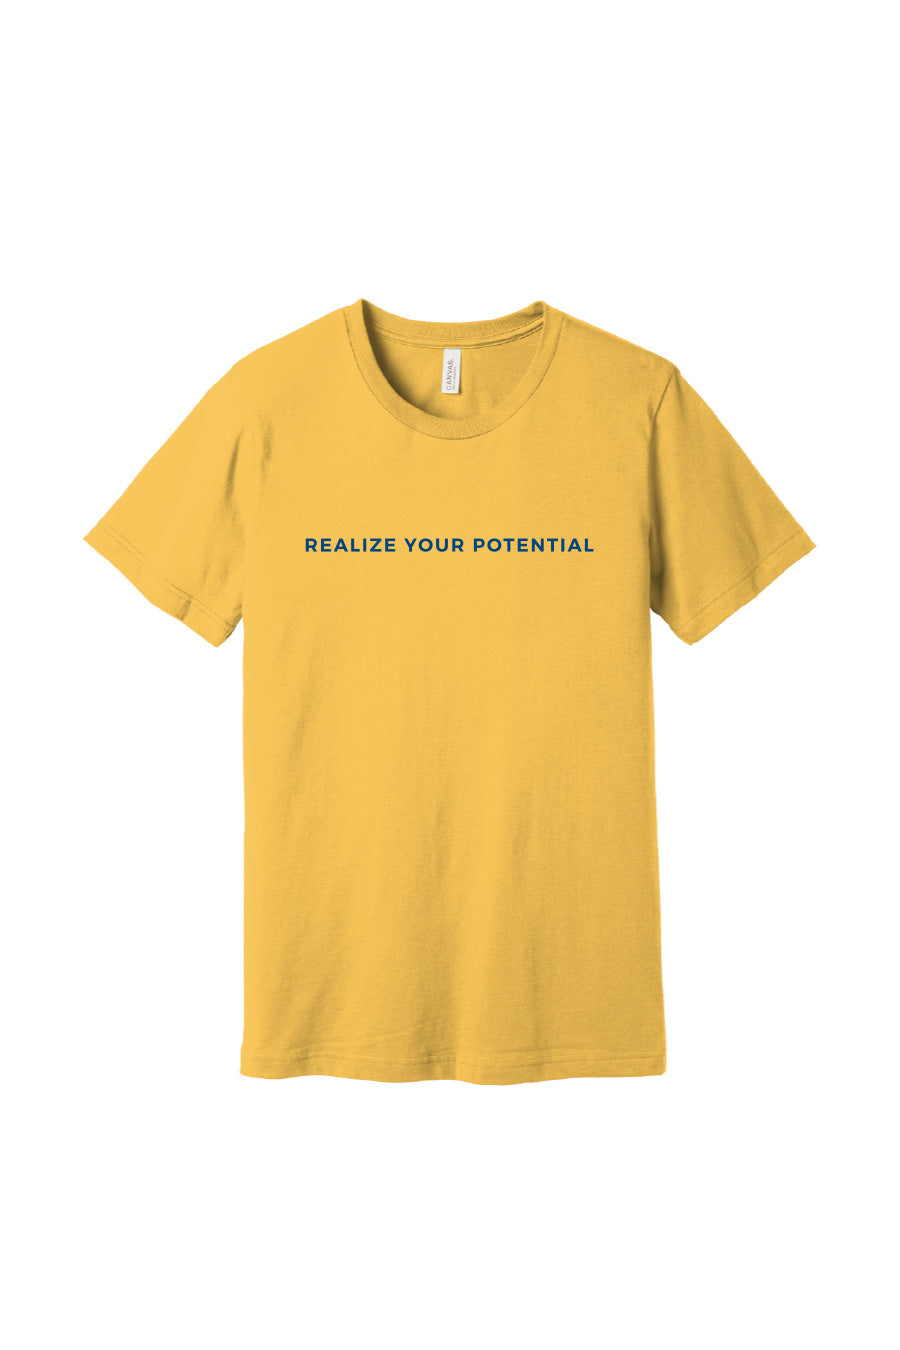 Realize Your Potential Tee